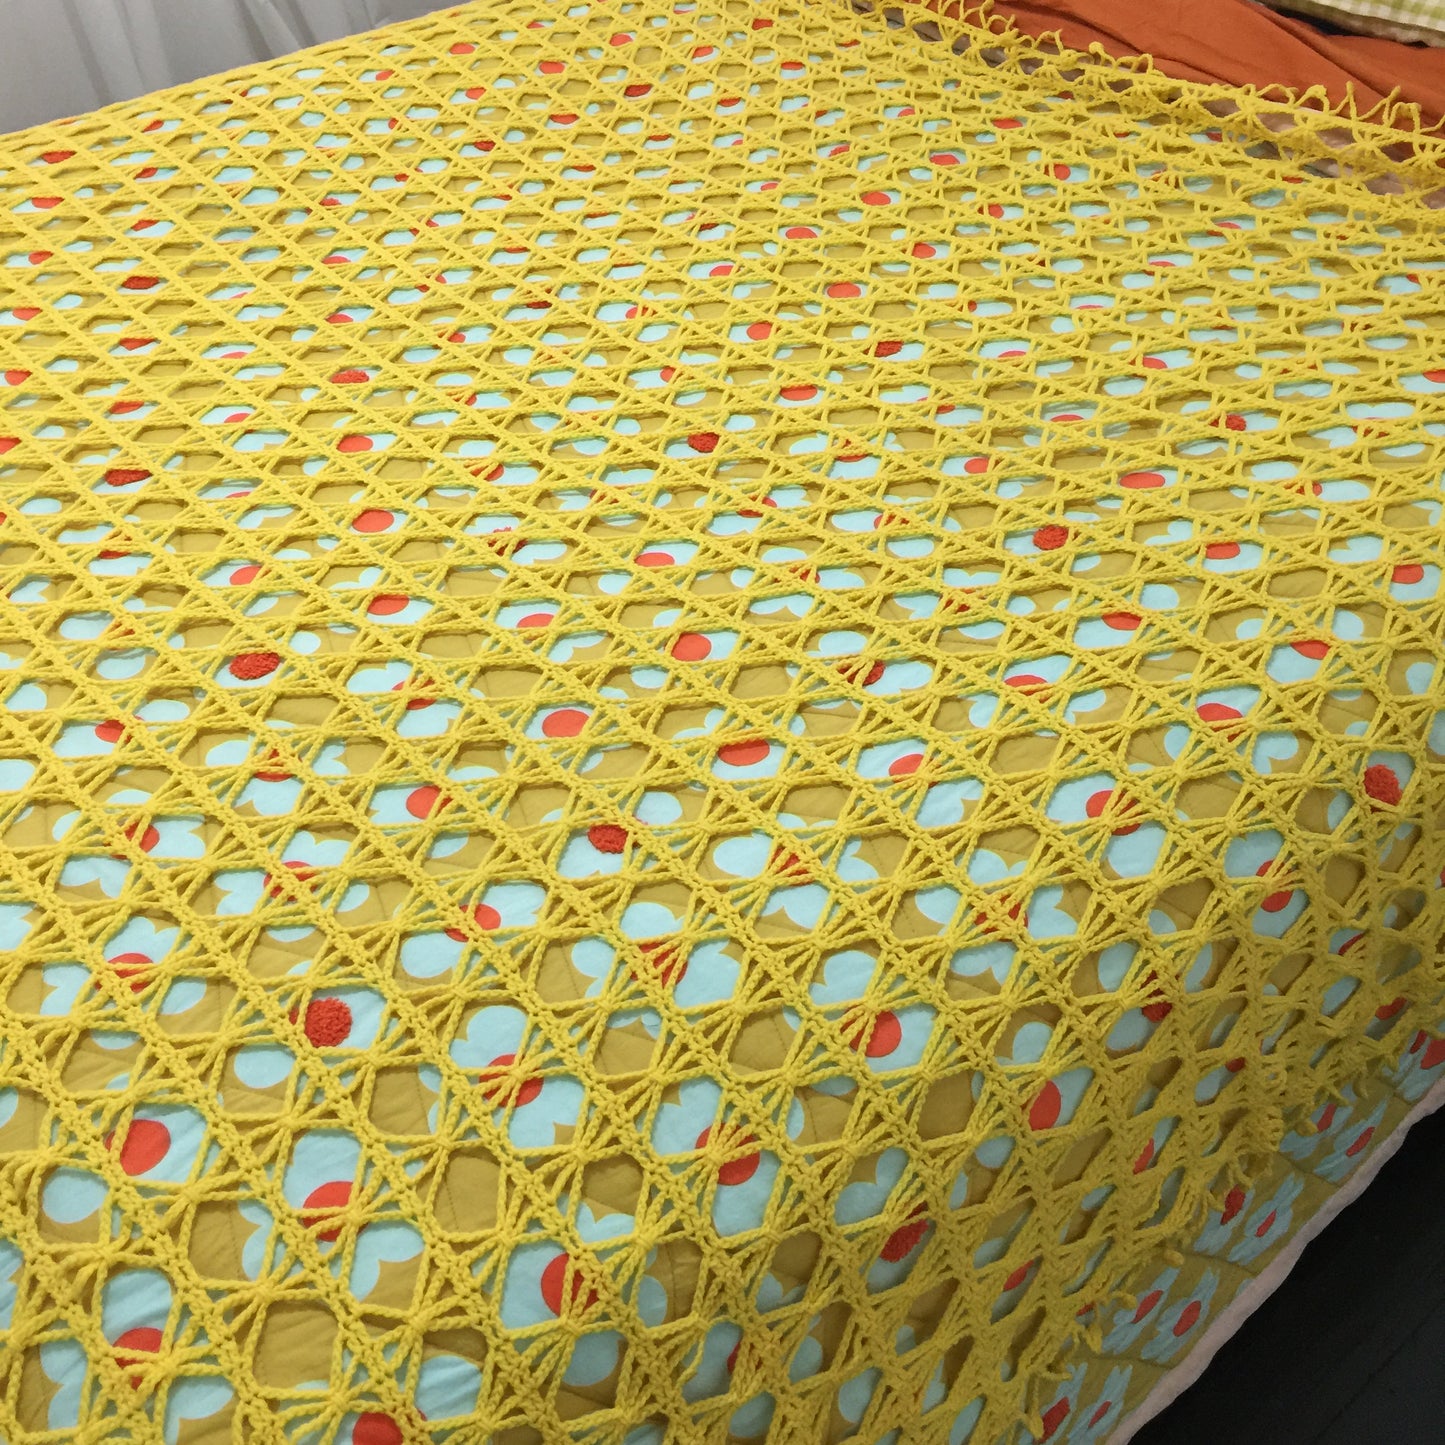 YELLOW Knitted Blanket Bed TOPPER Fun Childs Bedroom Rug Bedspread Vintage